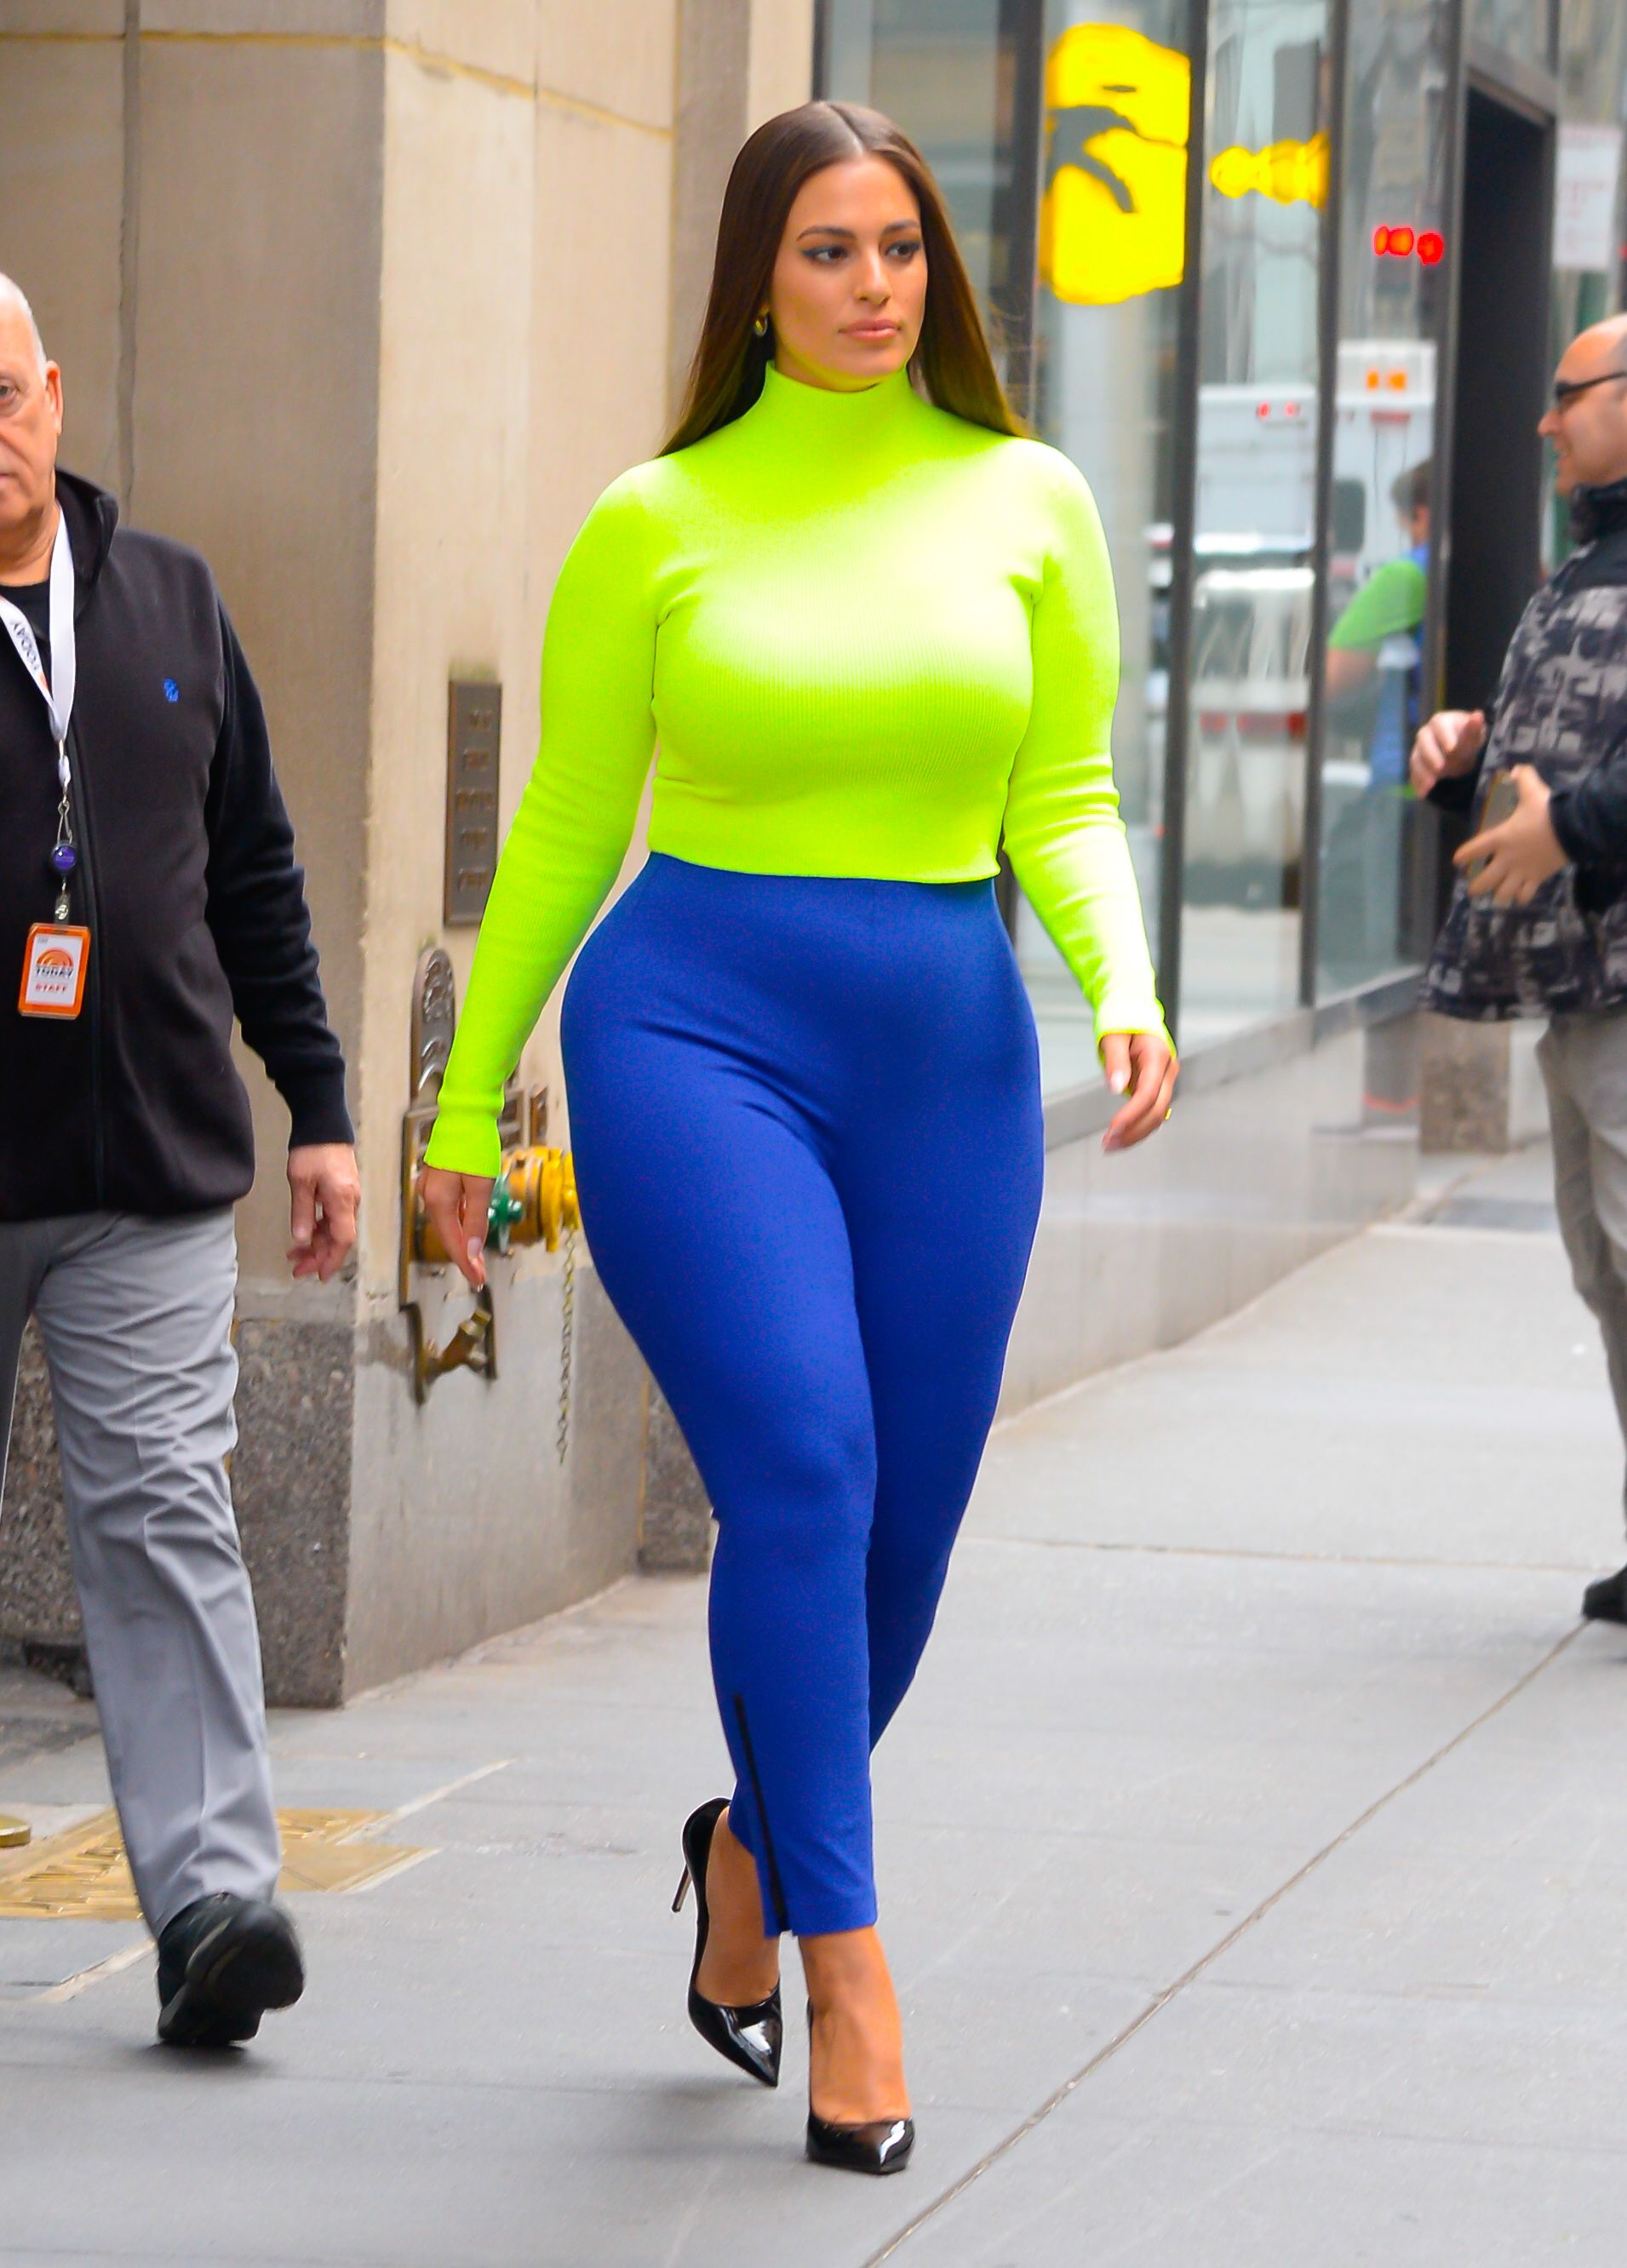 Neon Green Is the Newest Color Trend of 2019 — Shop Neon Fashion